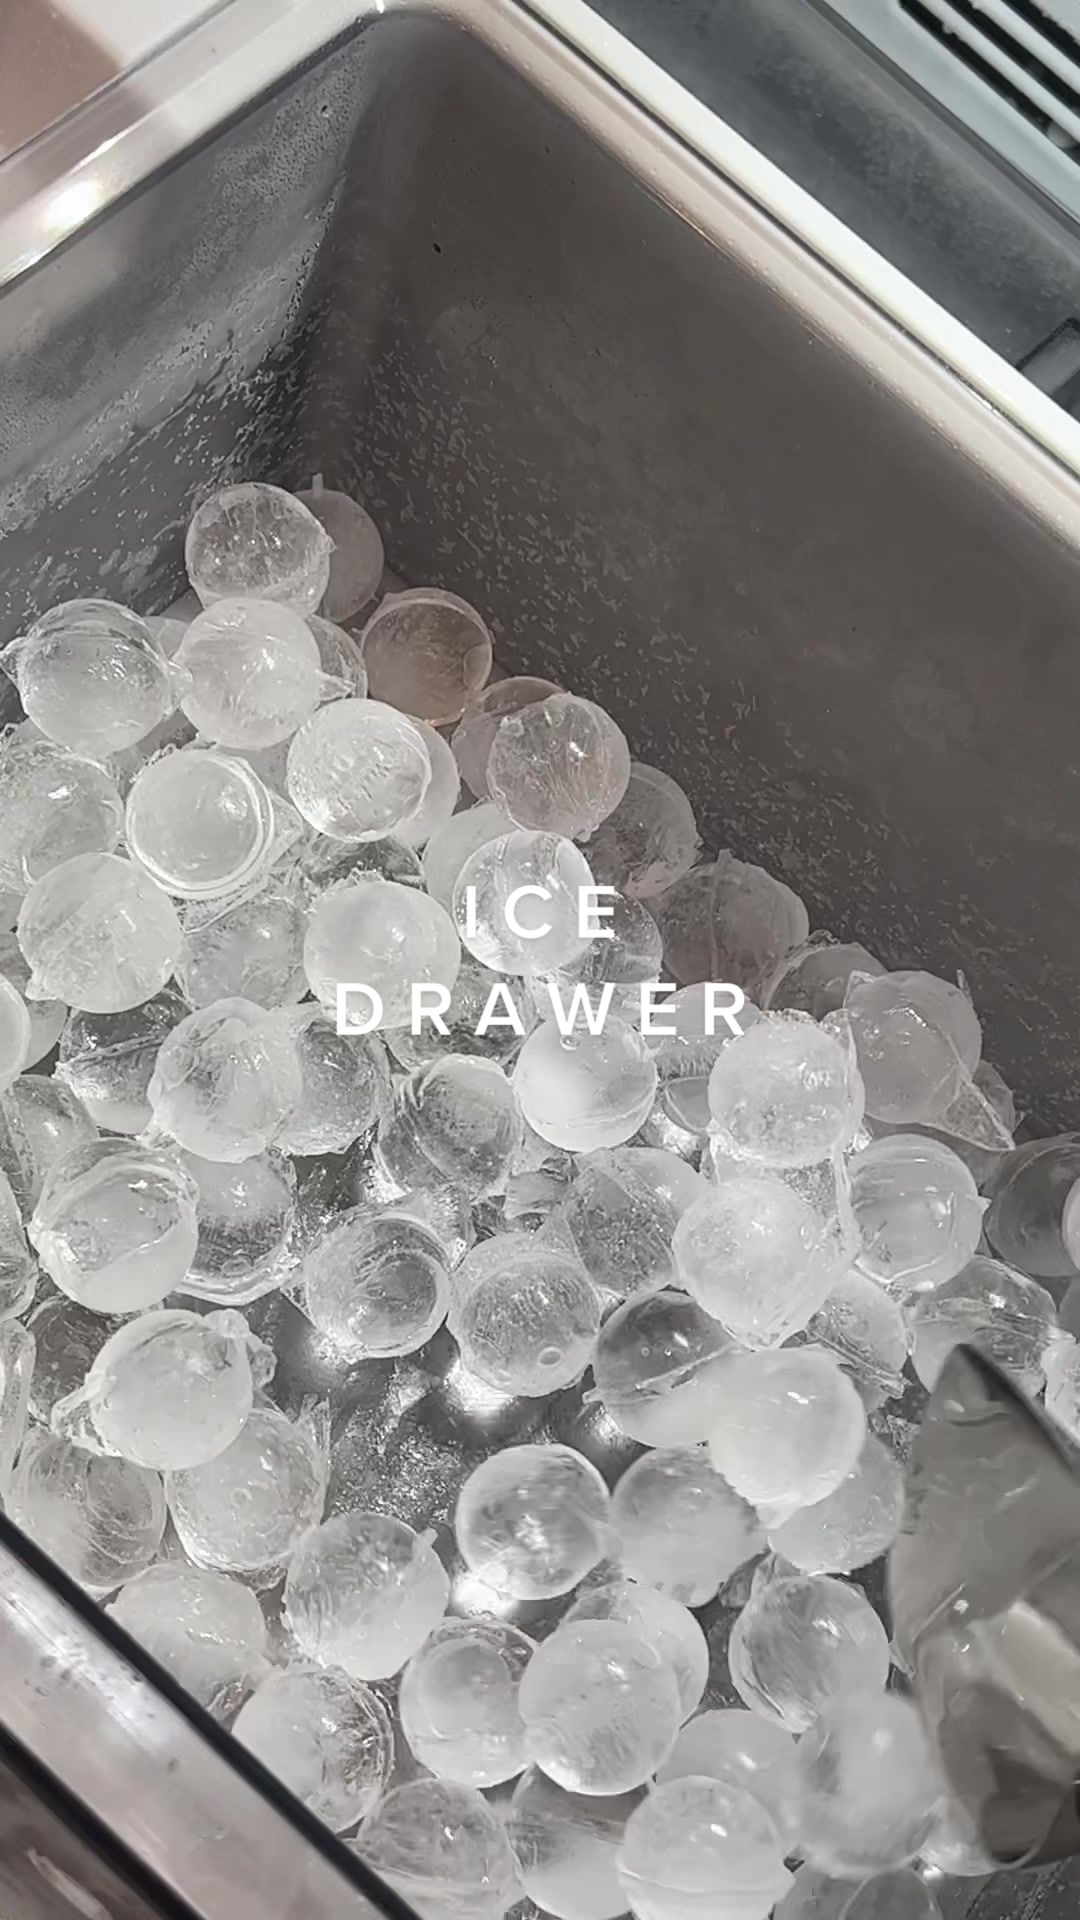 cute surprise at the end🥹🥹🤍 ib @K A M I #fyp #foryoupage #asmr #asmrsounds #satisfying #organize #ice #icedrawer #shapedice #kitchen #home #restock  created by kaeli mae with kaeli mae's original sound